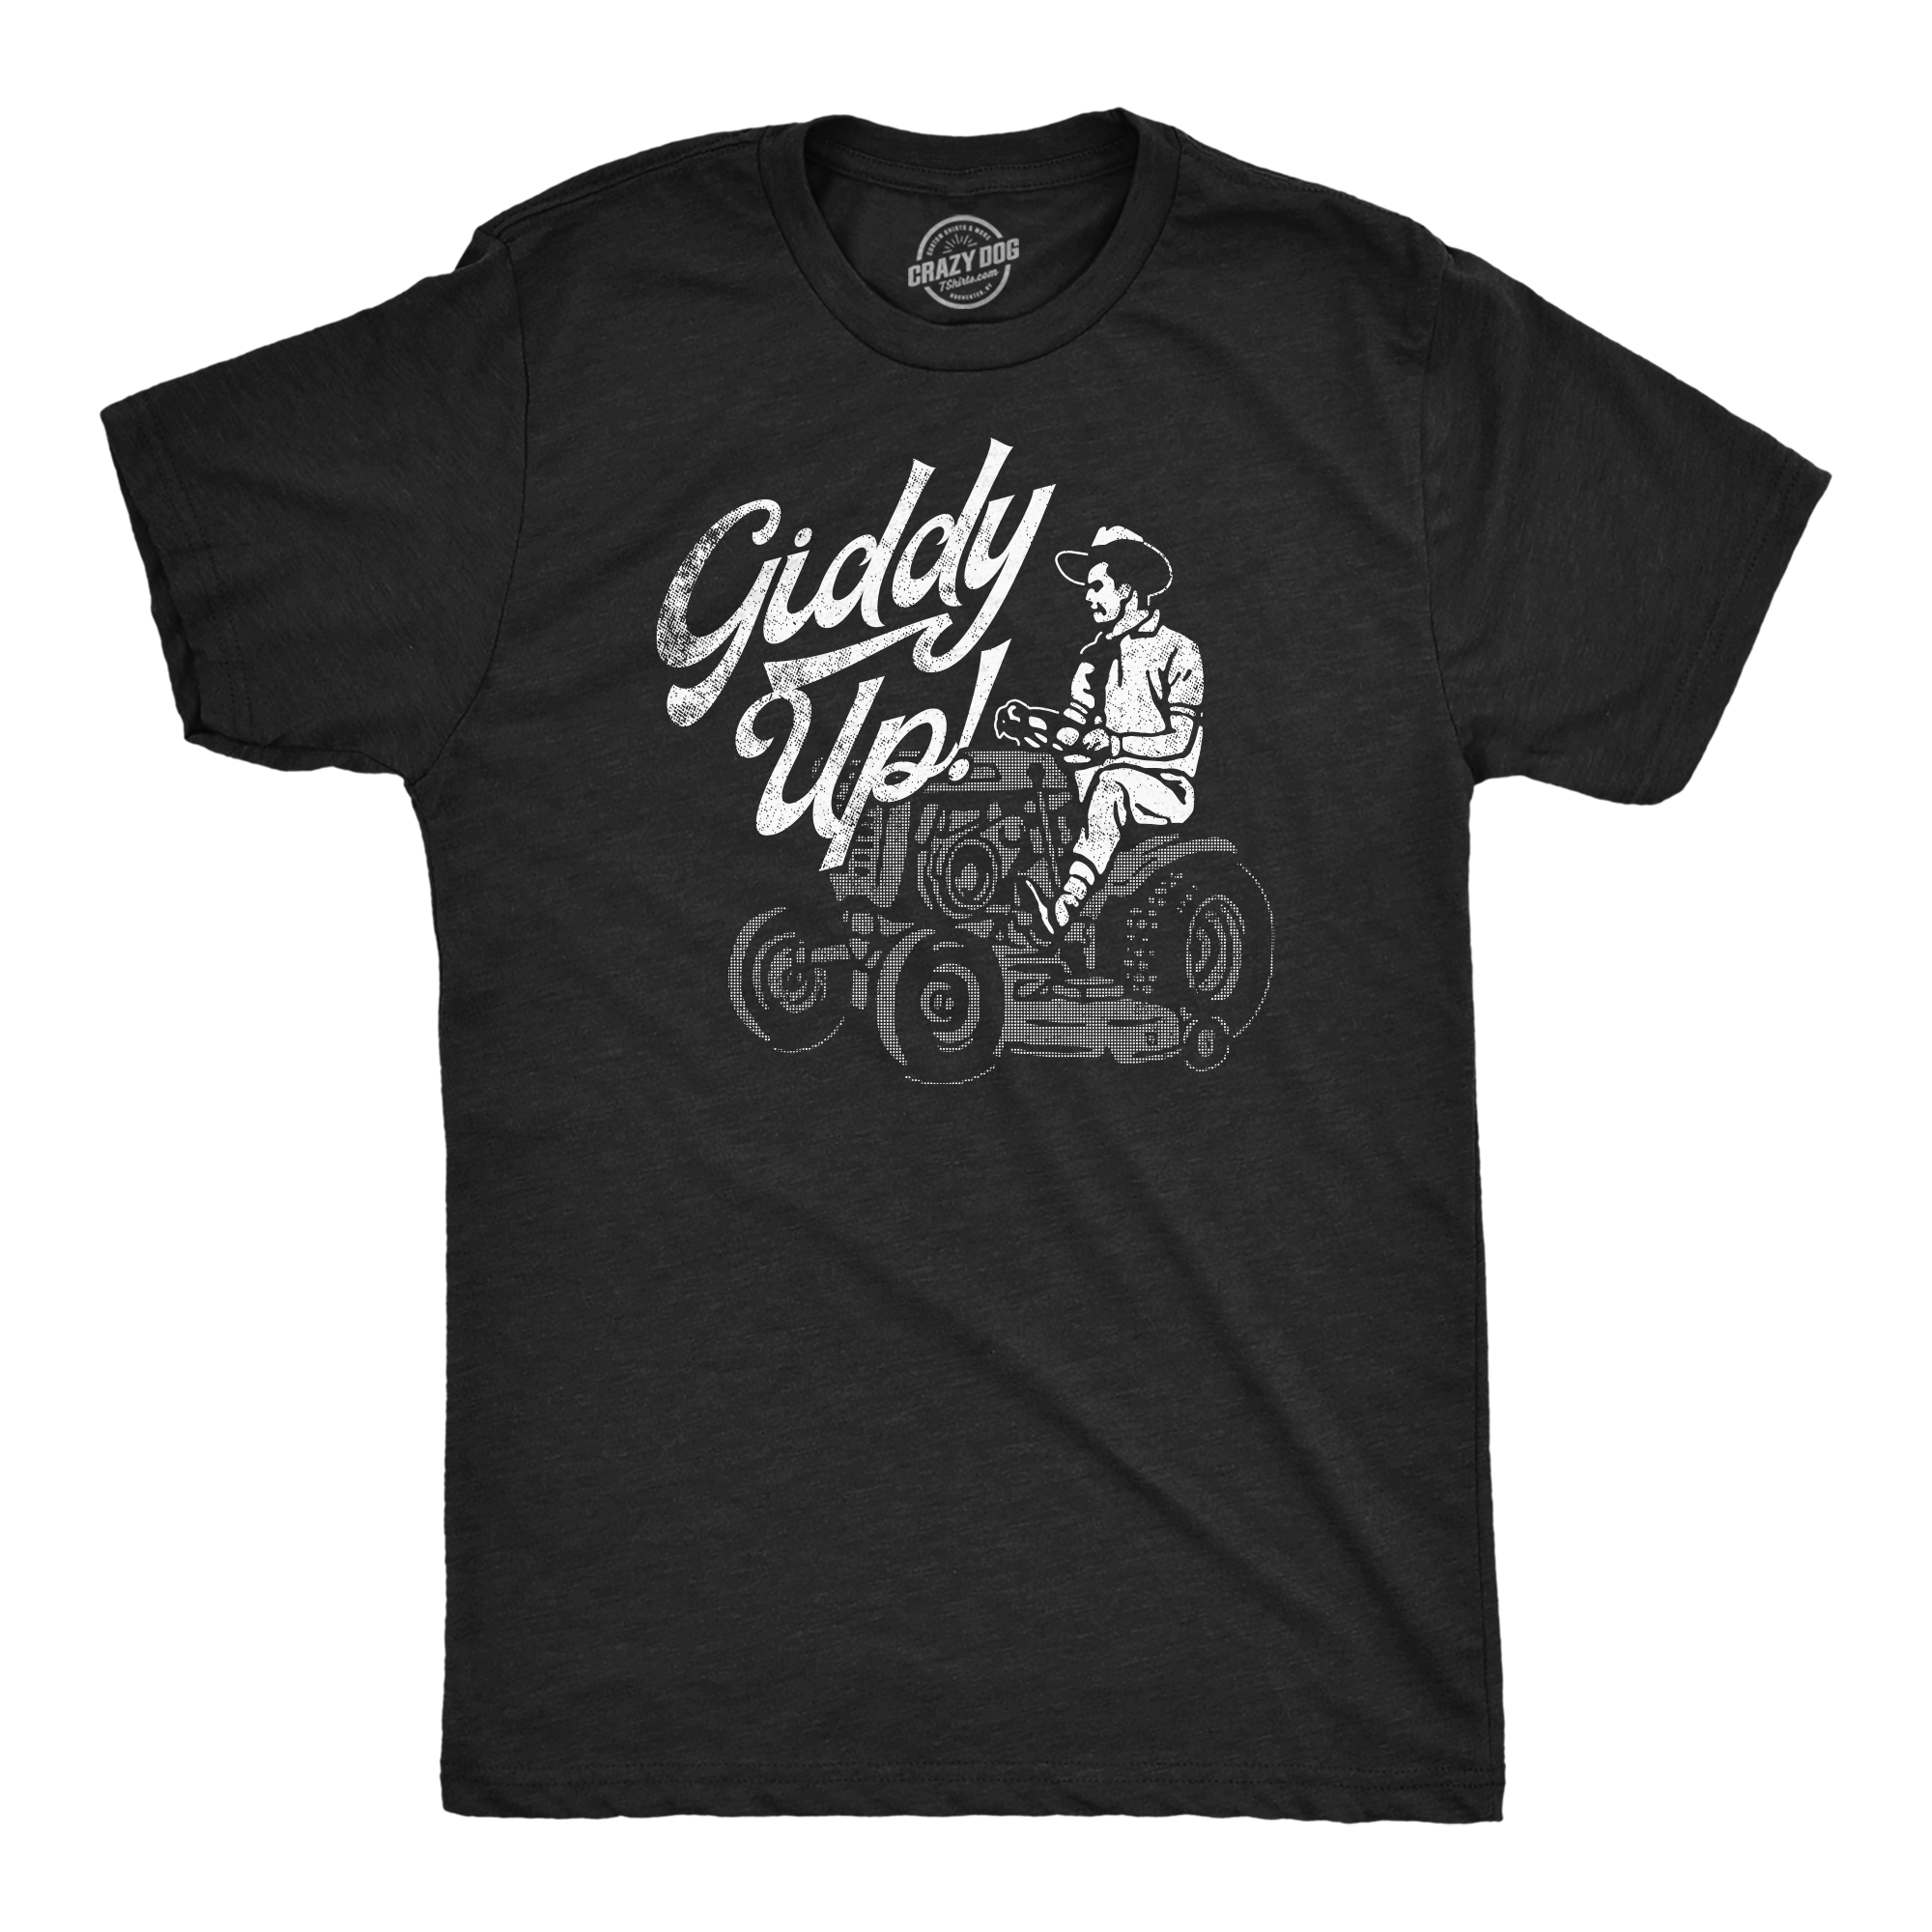 Funny Heather Black - Giddy Up Lawn Mower Giddy Up Lawn Mower Mens T Shirt Nerdy sarcastic Tee